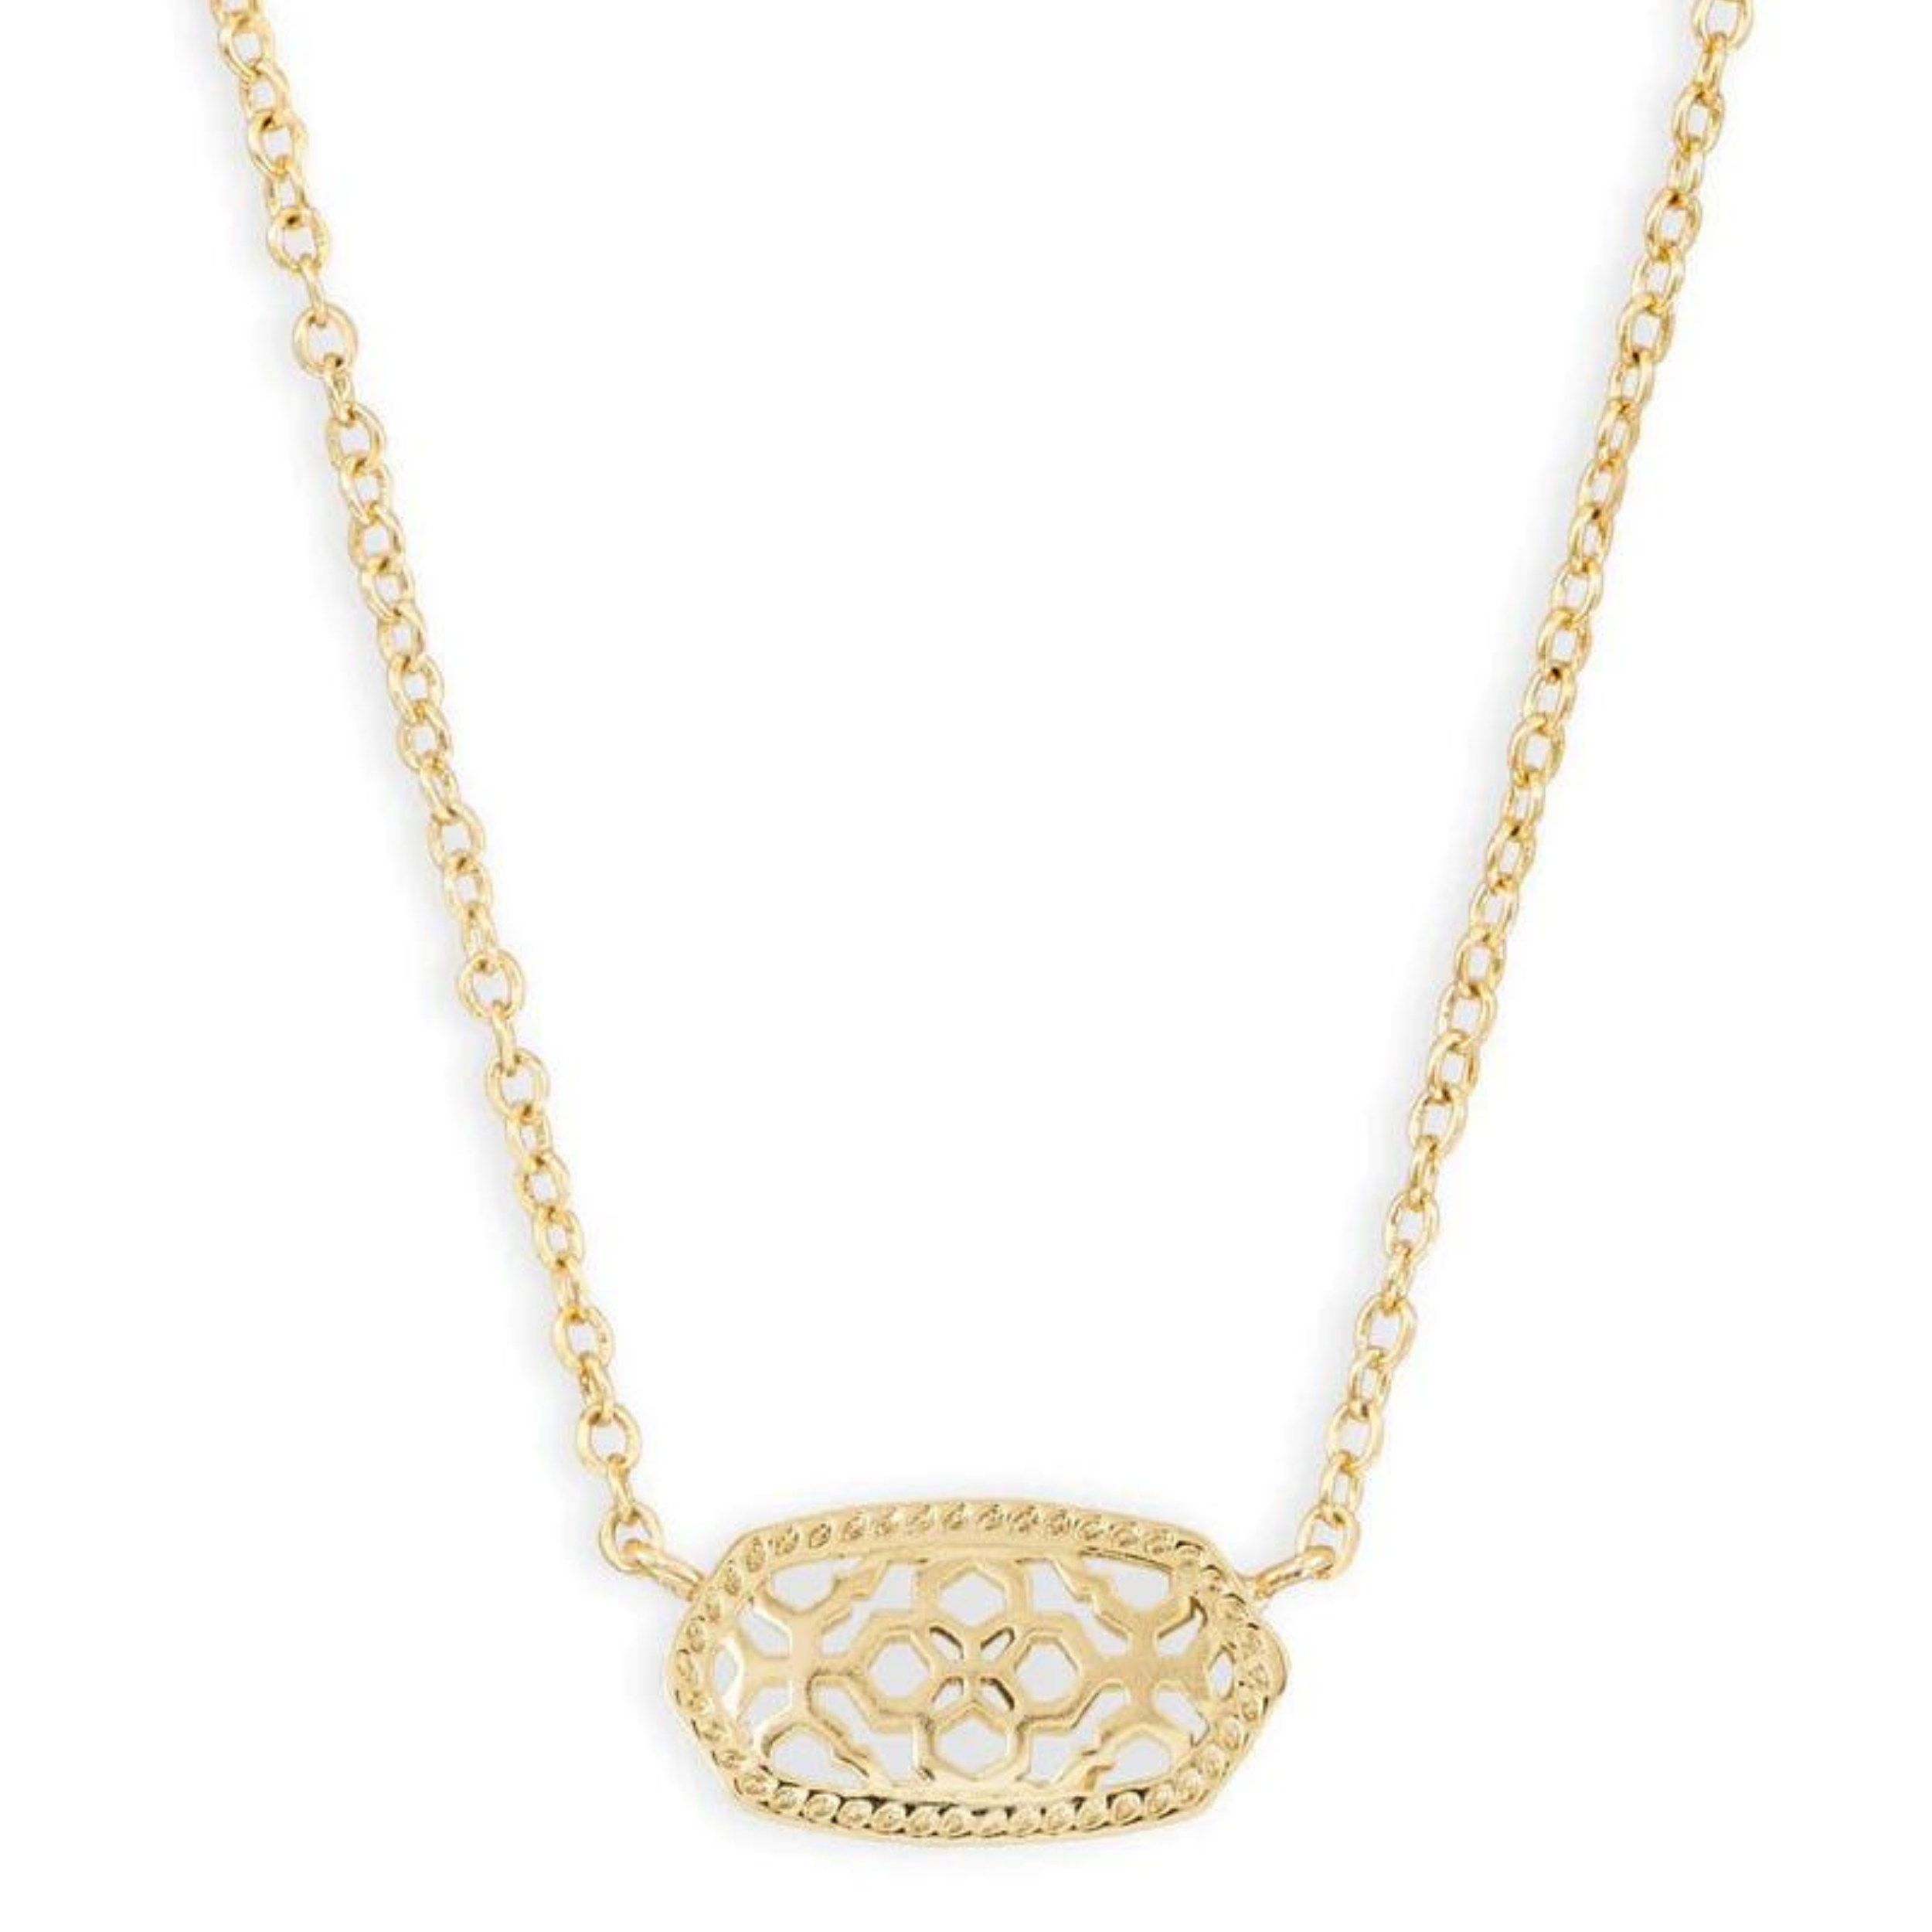 Gold necklace with gold filigree pendant, pictured on a white background.